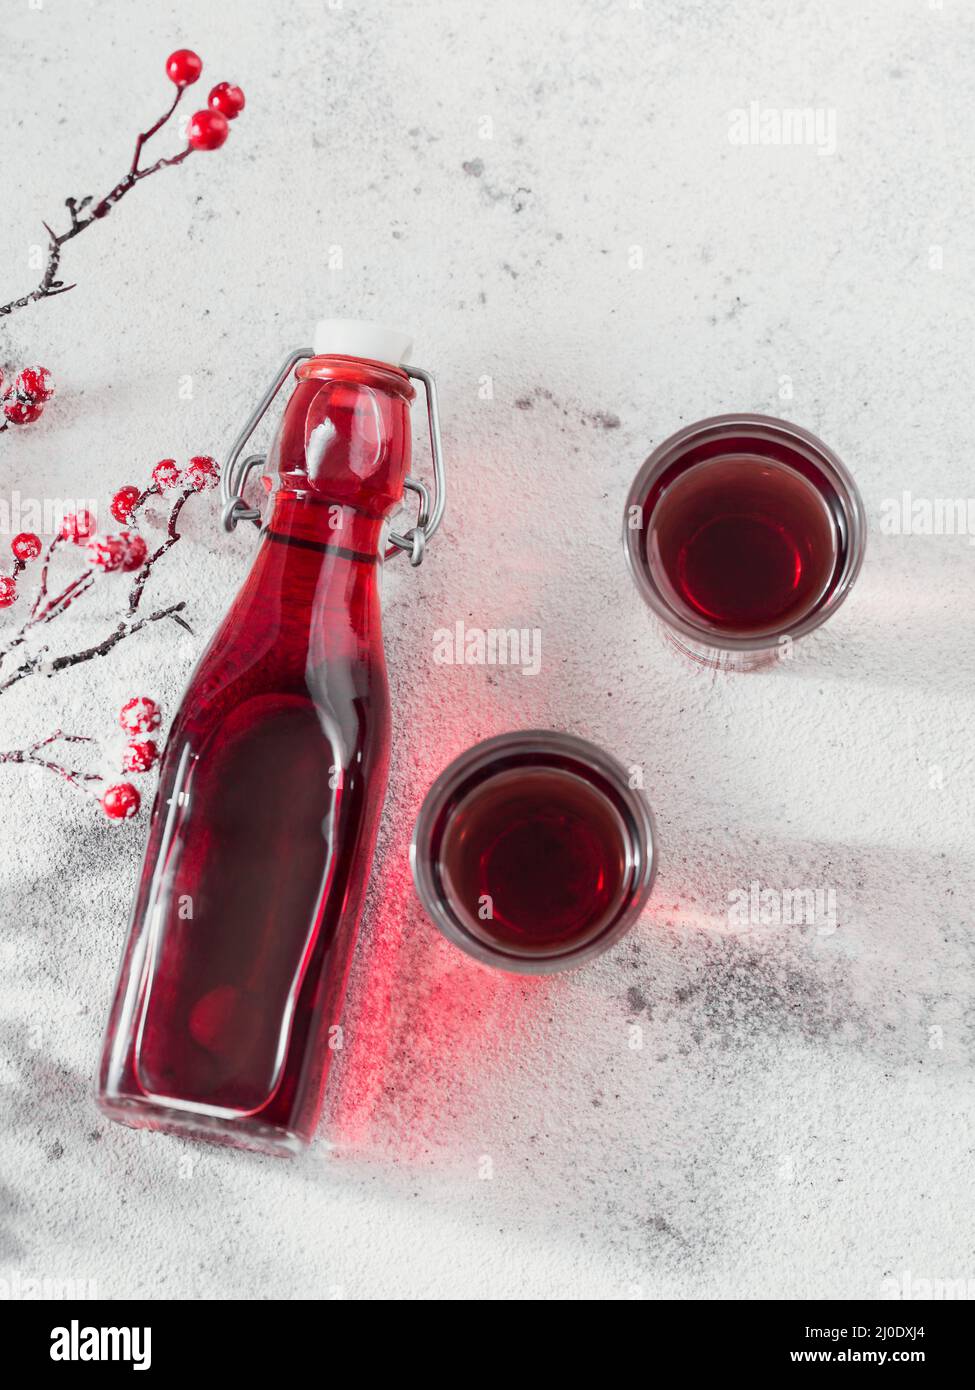 Homemade infused vodka, tincture or liqueur of red cherry on white background. Berry alcoholic drinks concept. Stock Photo